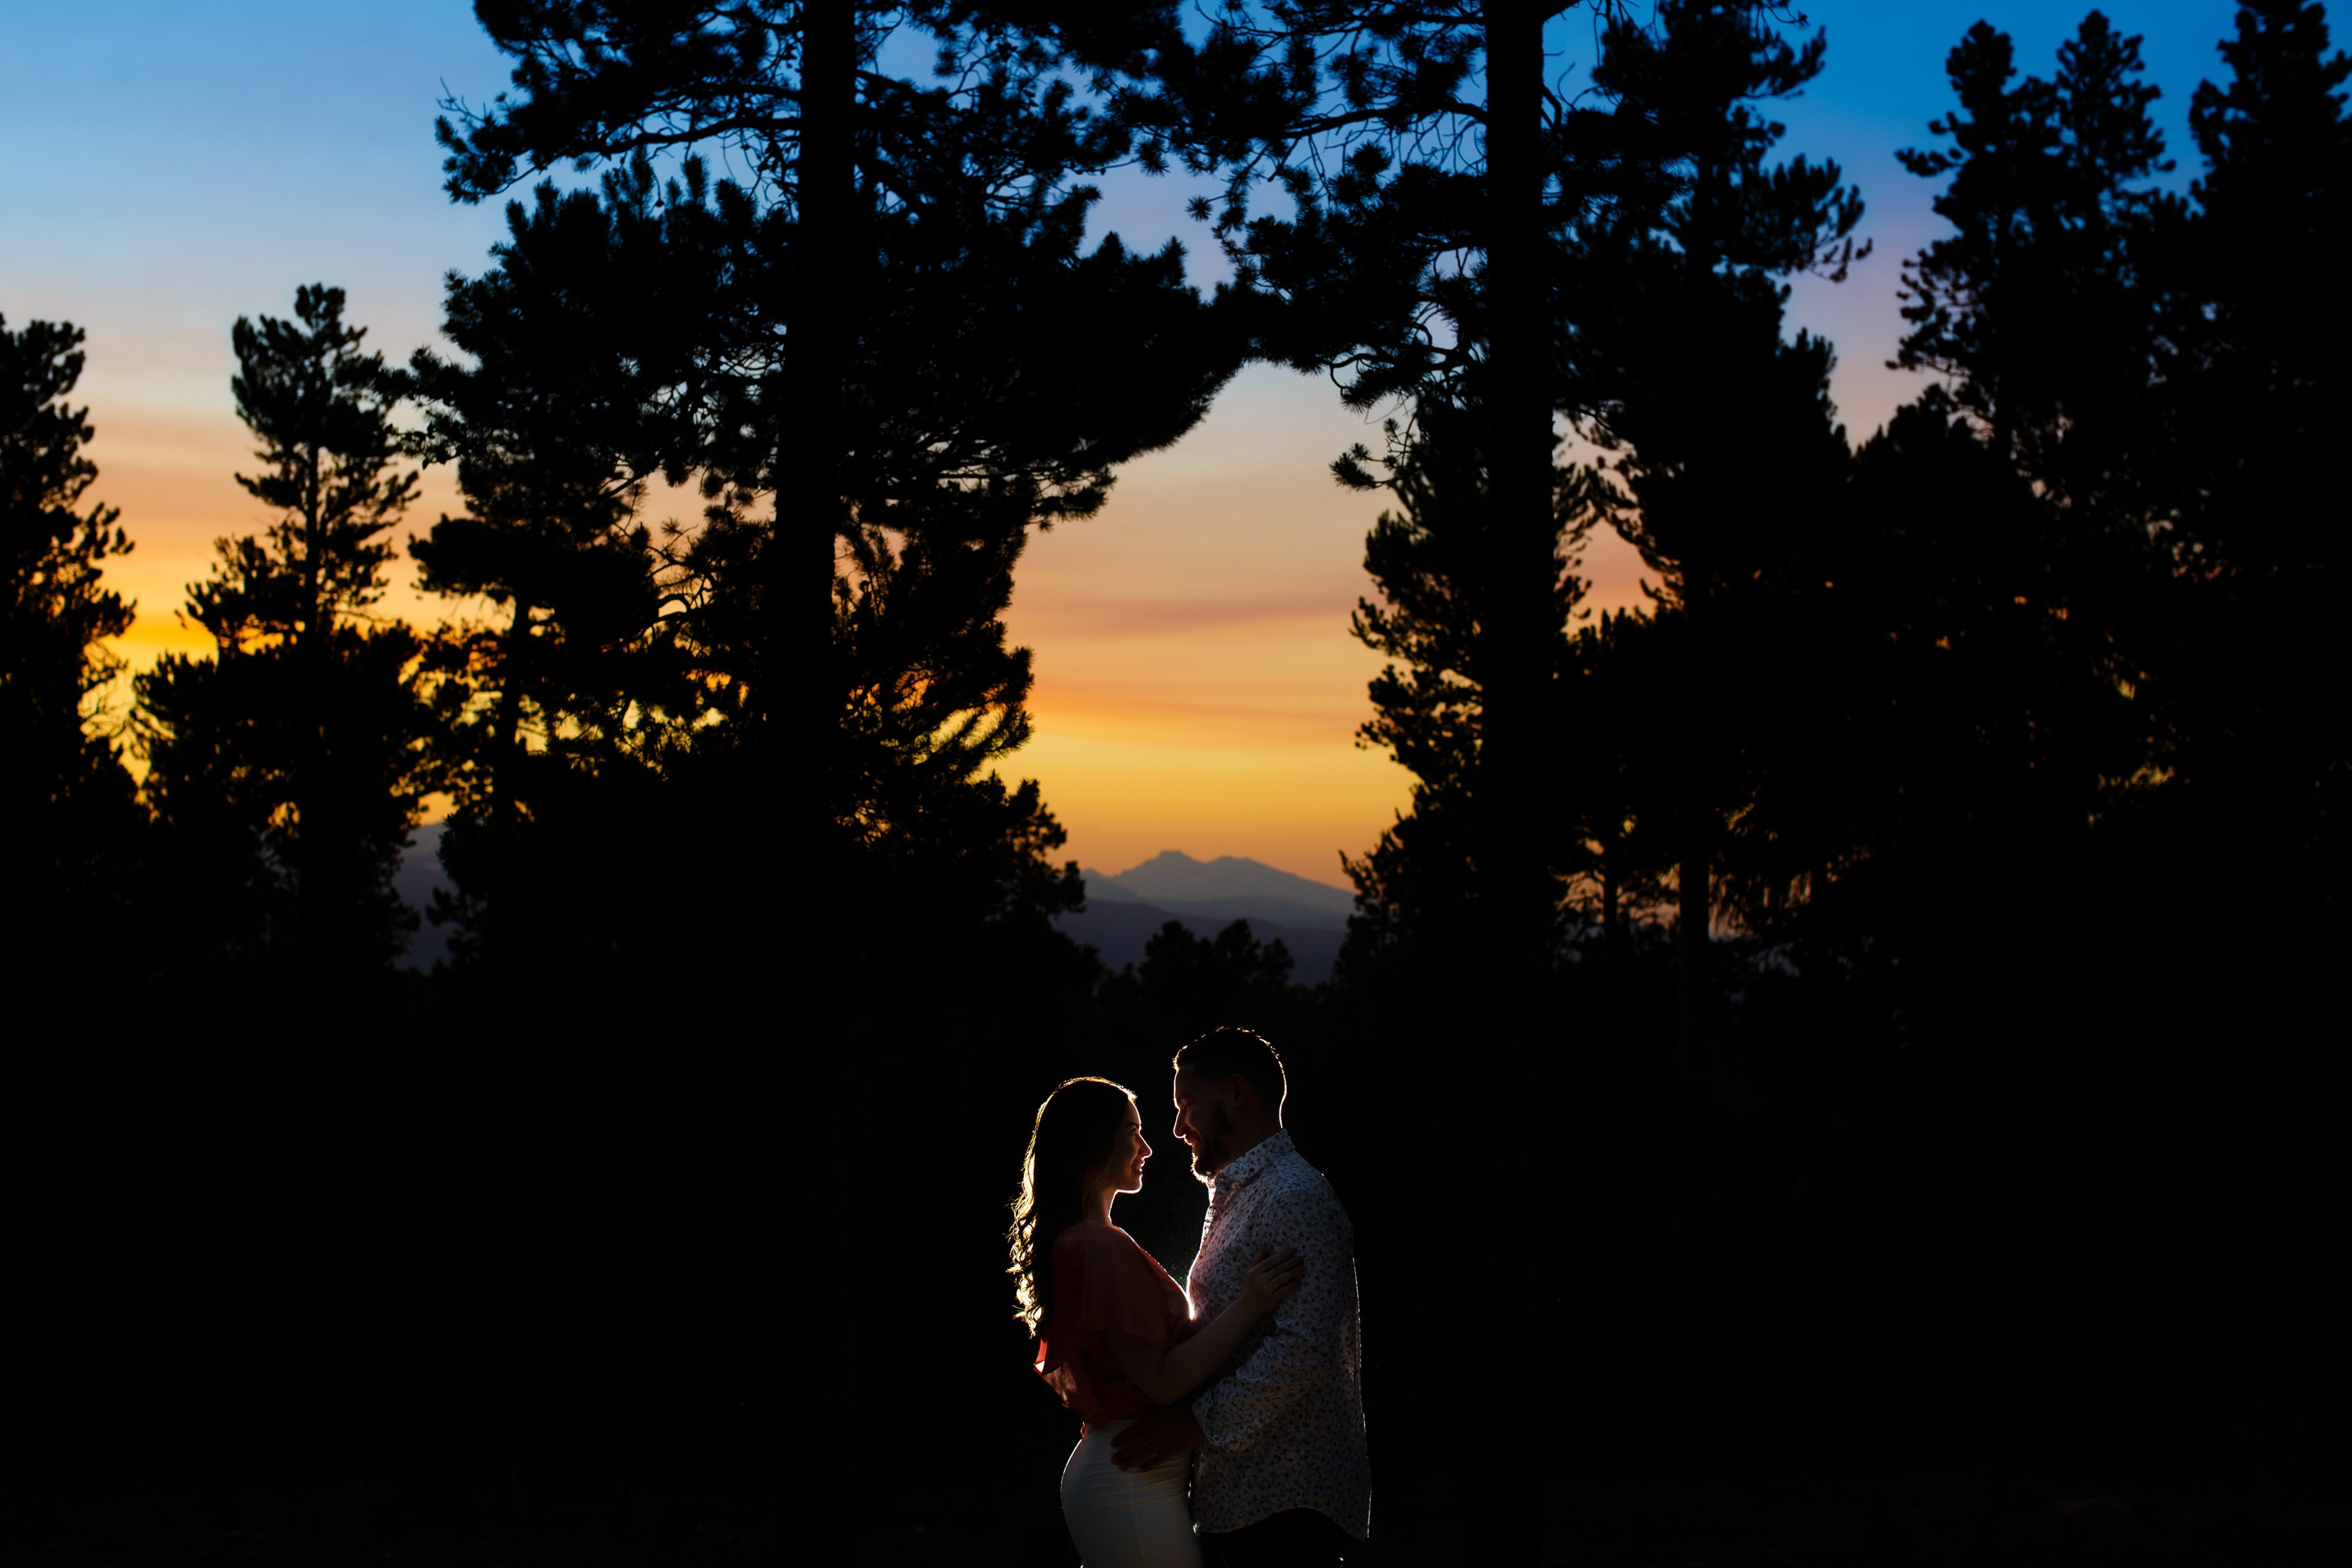 Sharon and Nick embrace as the sun sets over the mountains during their colorful engagement in Golden Gate Canyon State Park